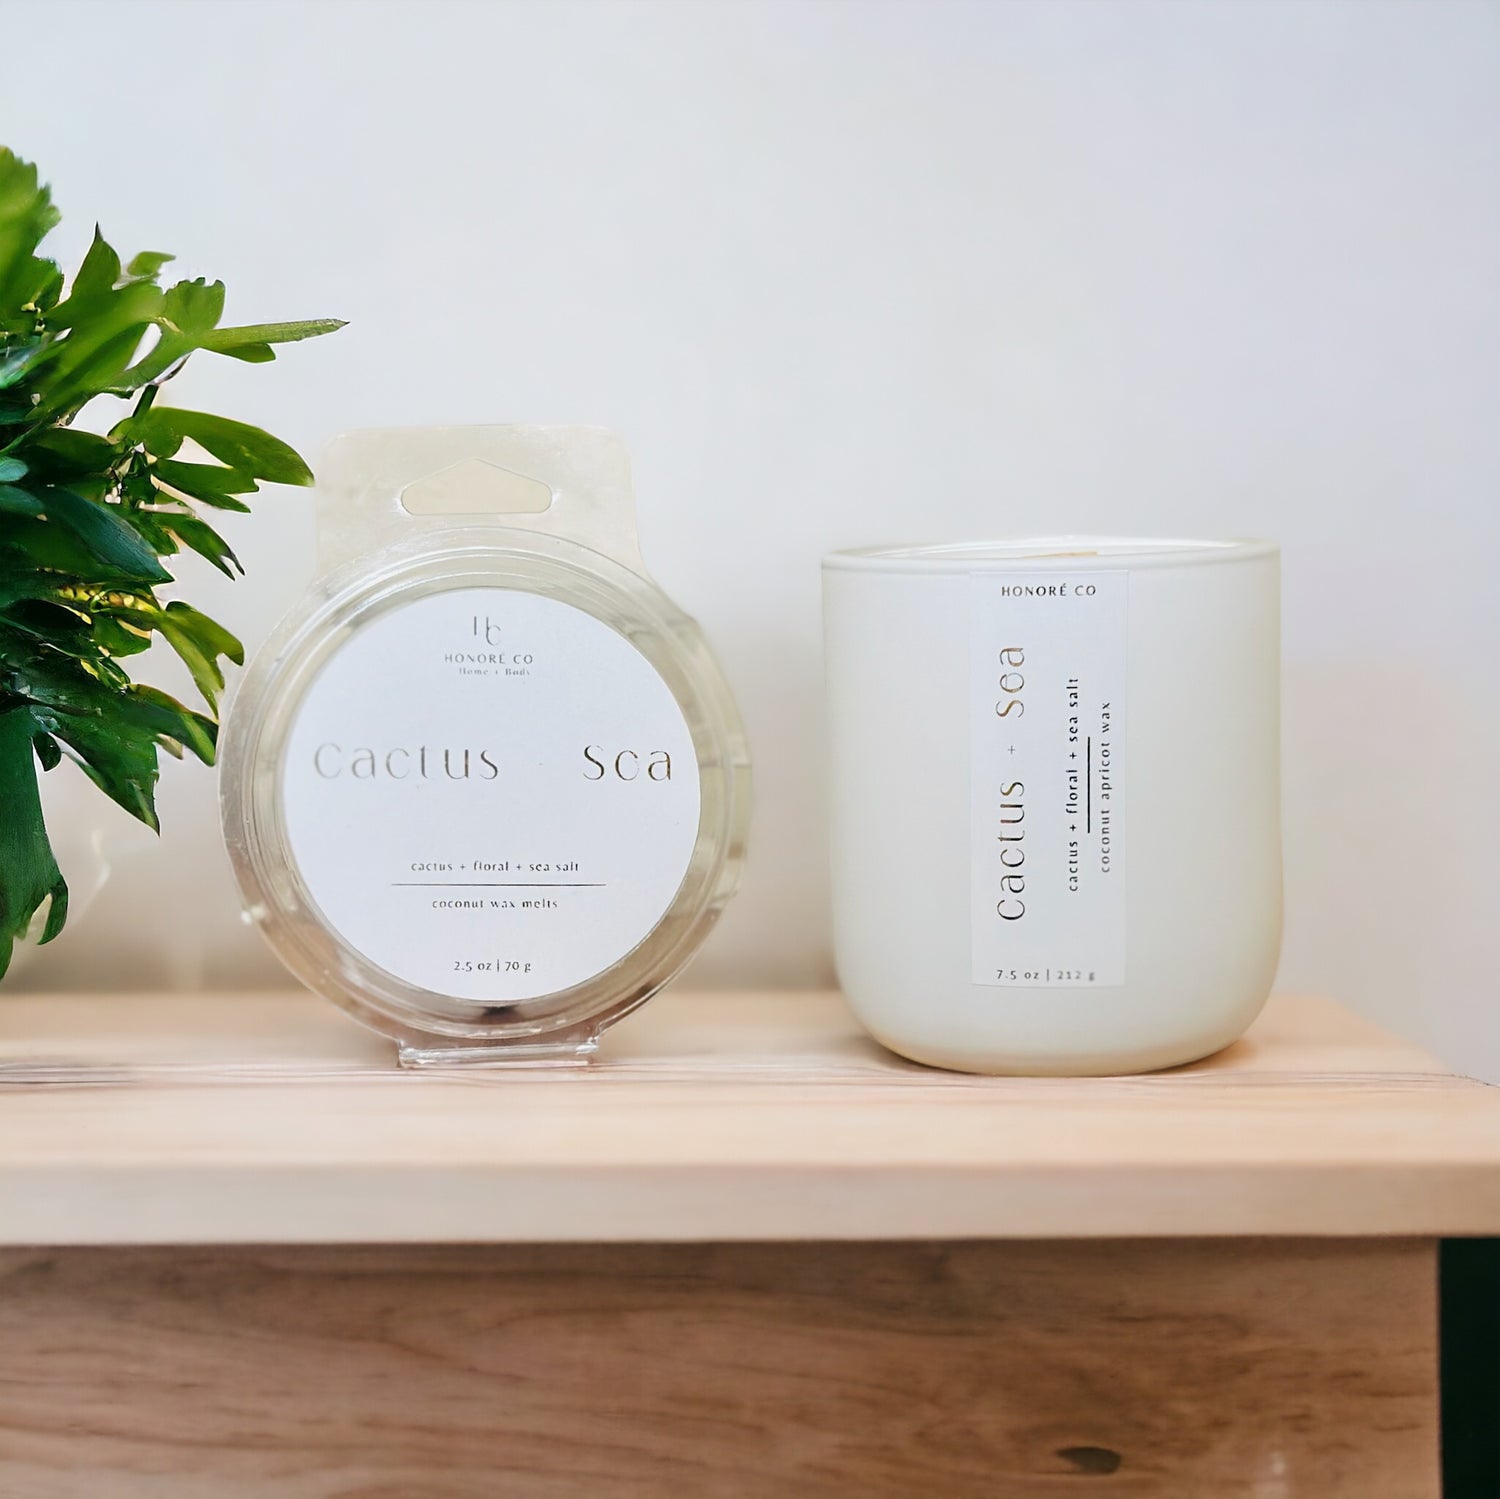 Coconut Wax Candles